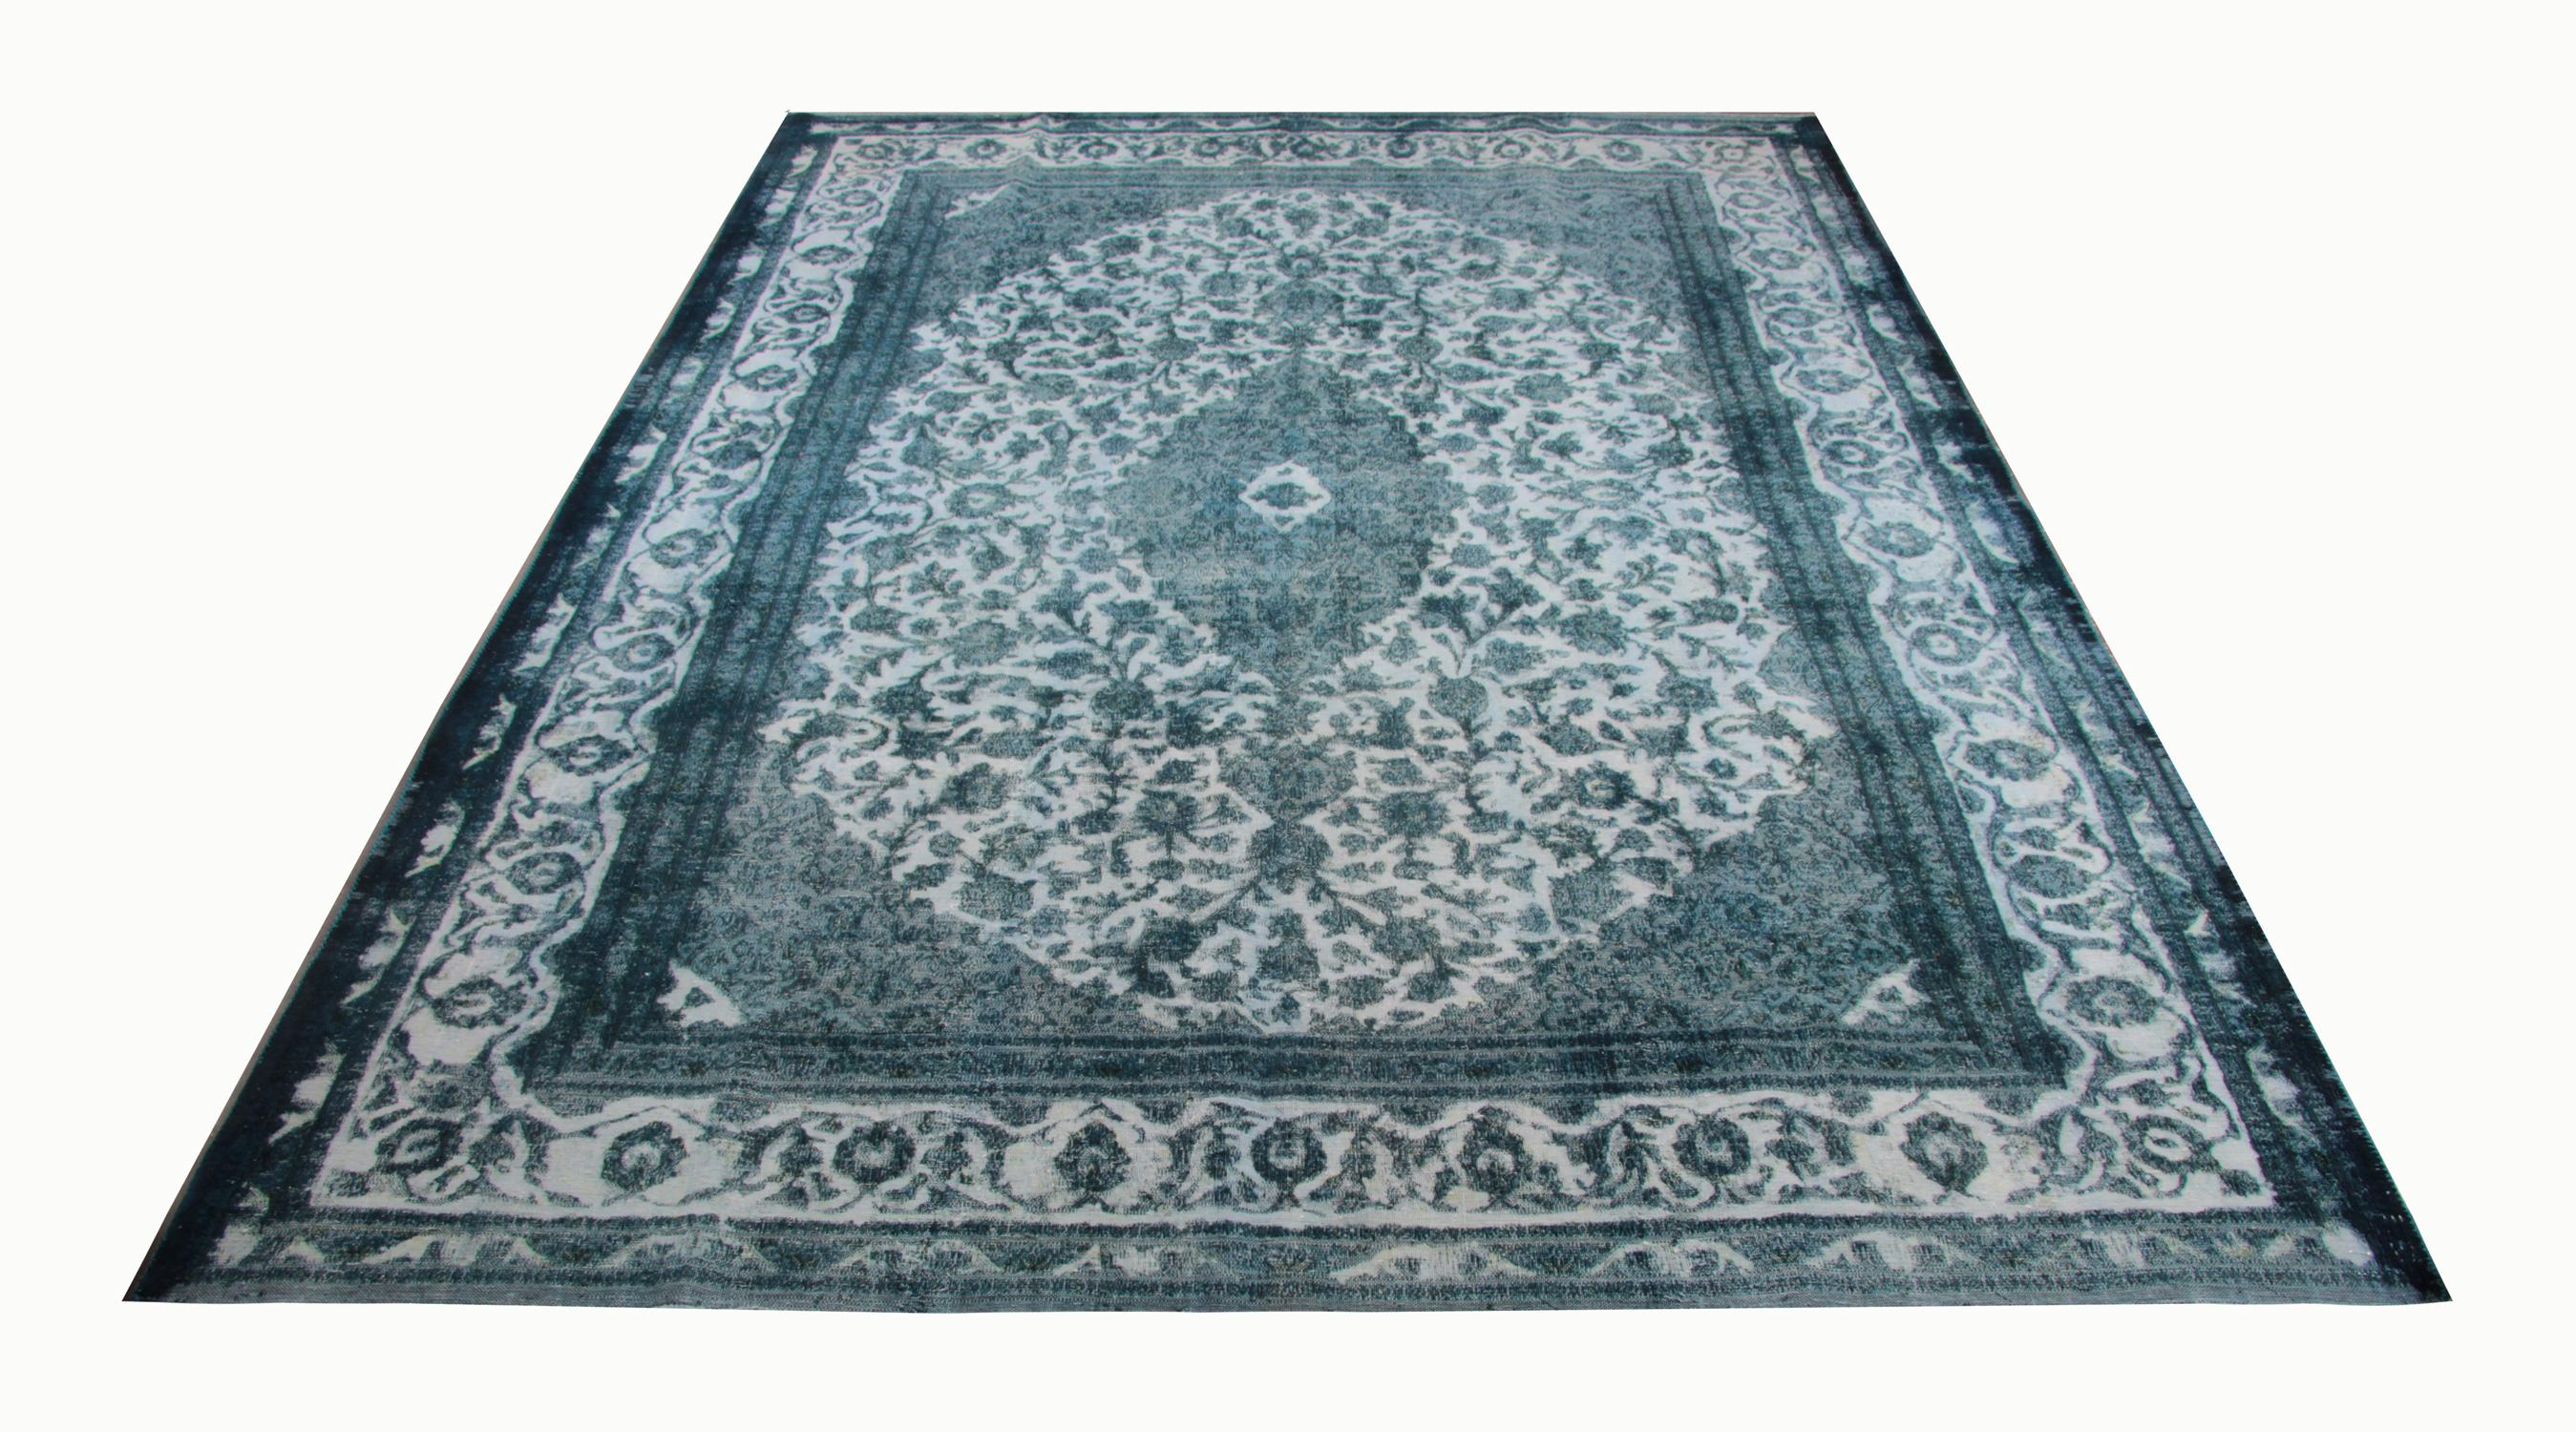 This bold green medallion rug features an intricate floral design woven with immense detail through both the centre and border. Symmetrical and sophisticated this piece is sure to make the perfect accent accessory for any room. Easily style this